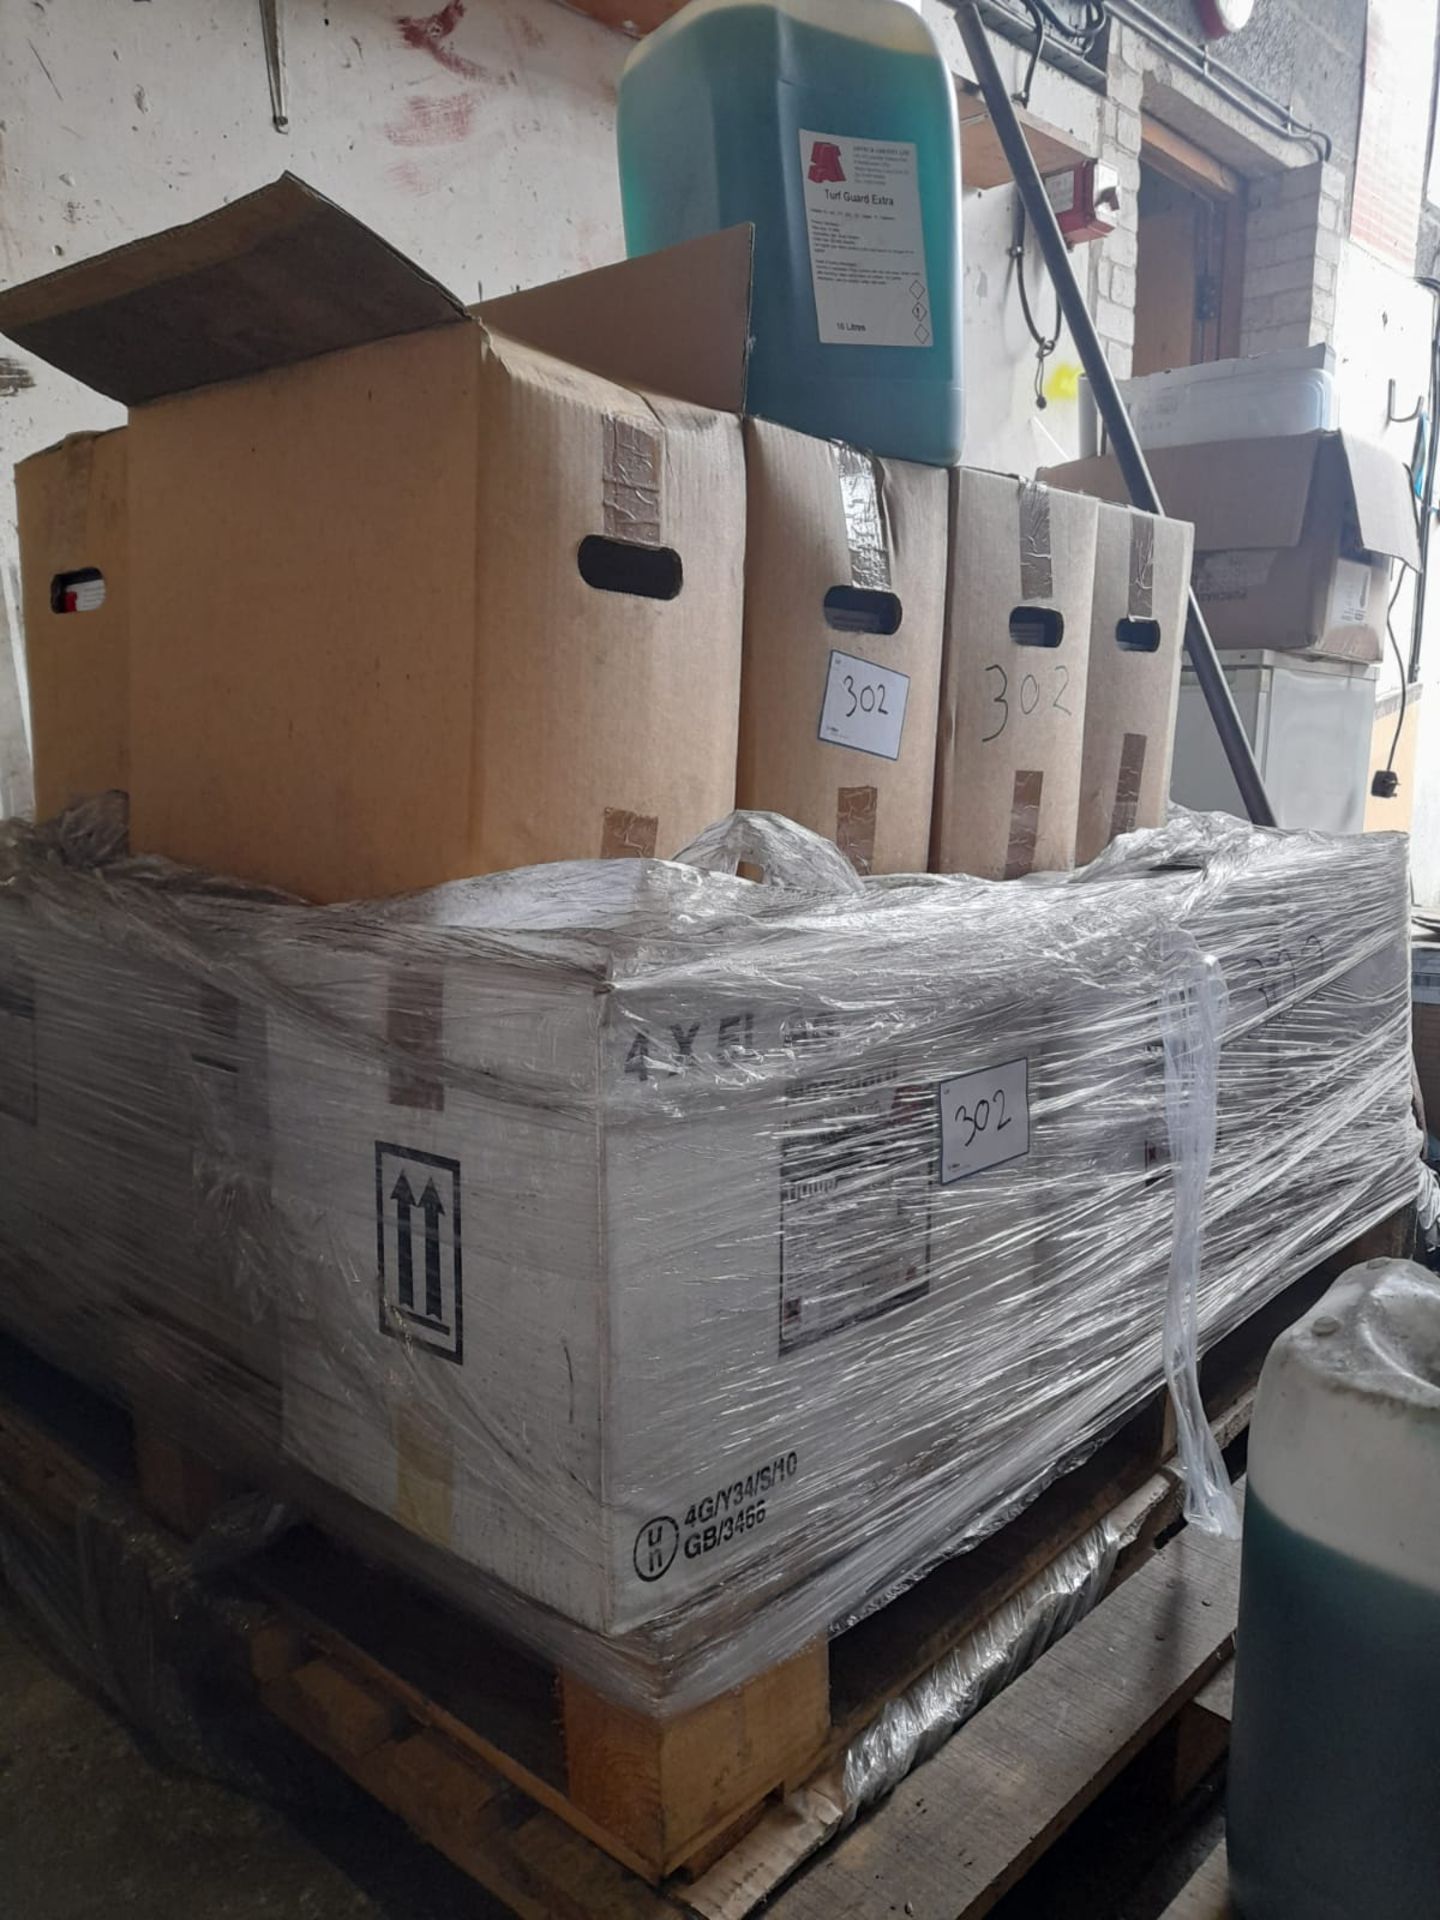 Pallet Of Approximately 15 Boxes Of Mossguard And Turf Guard Extra